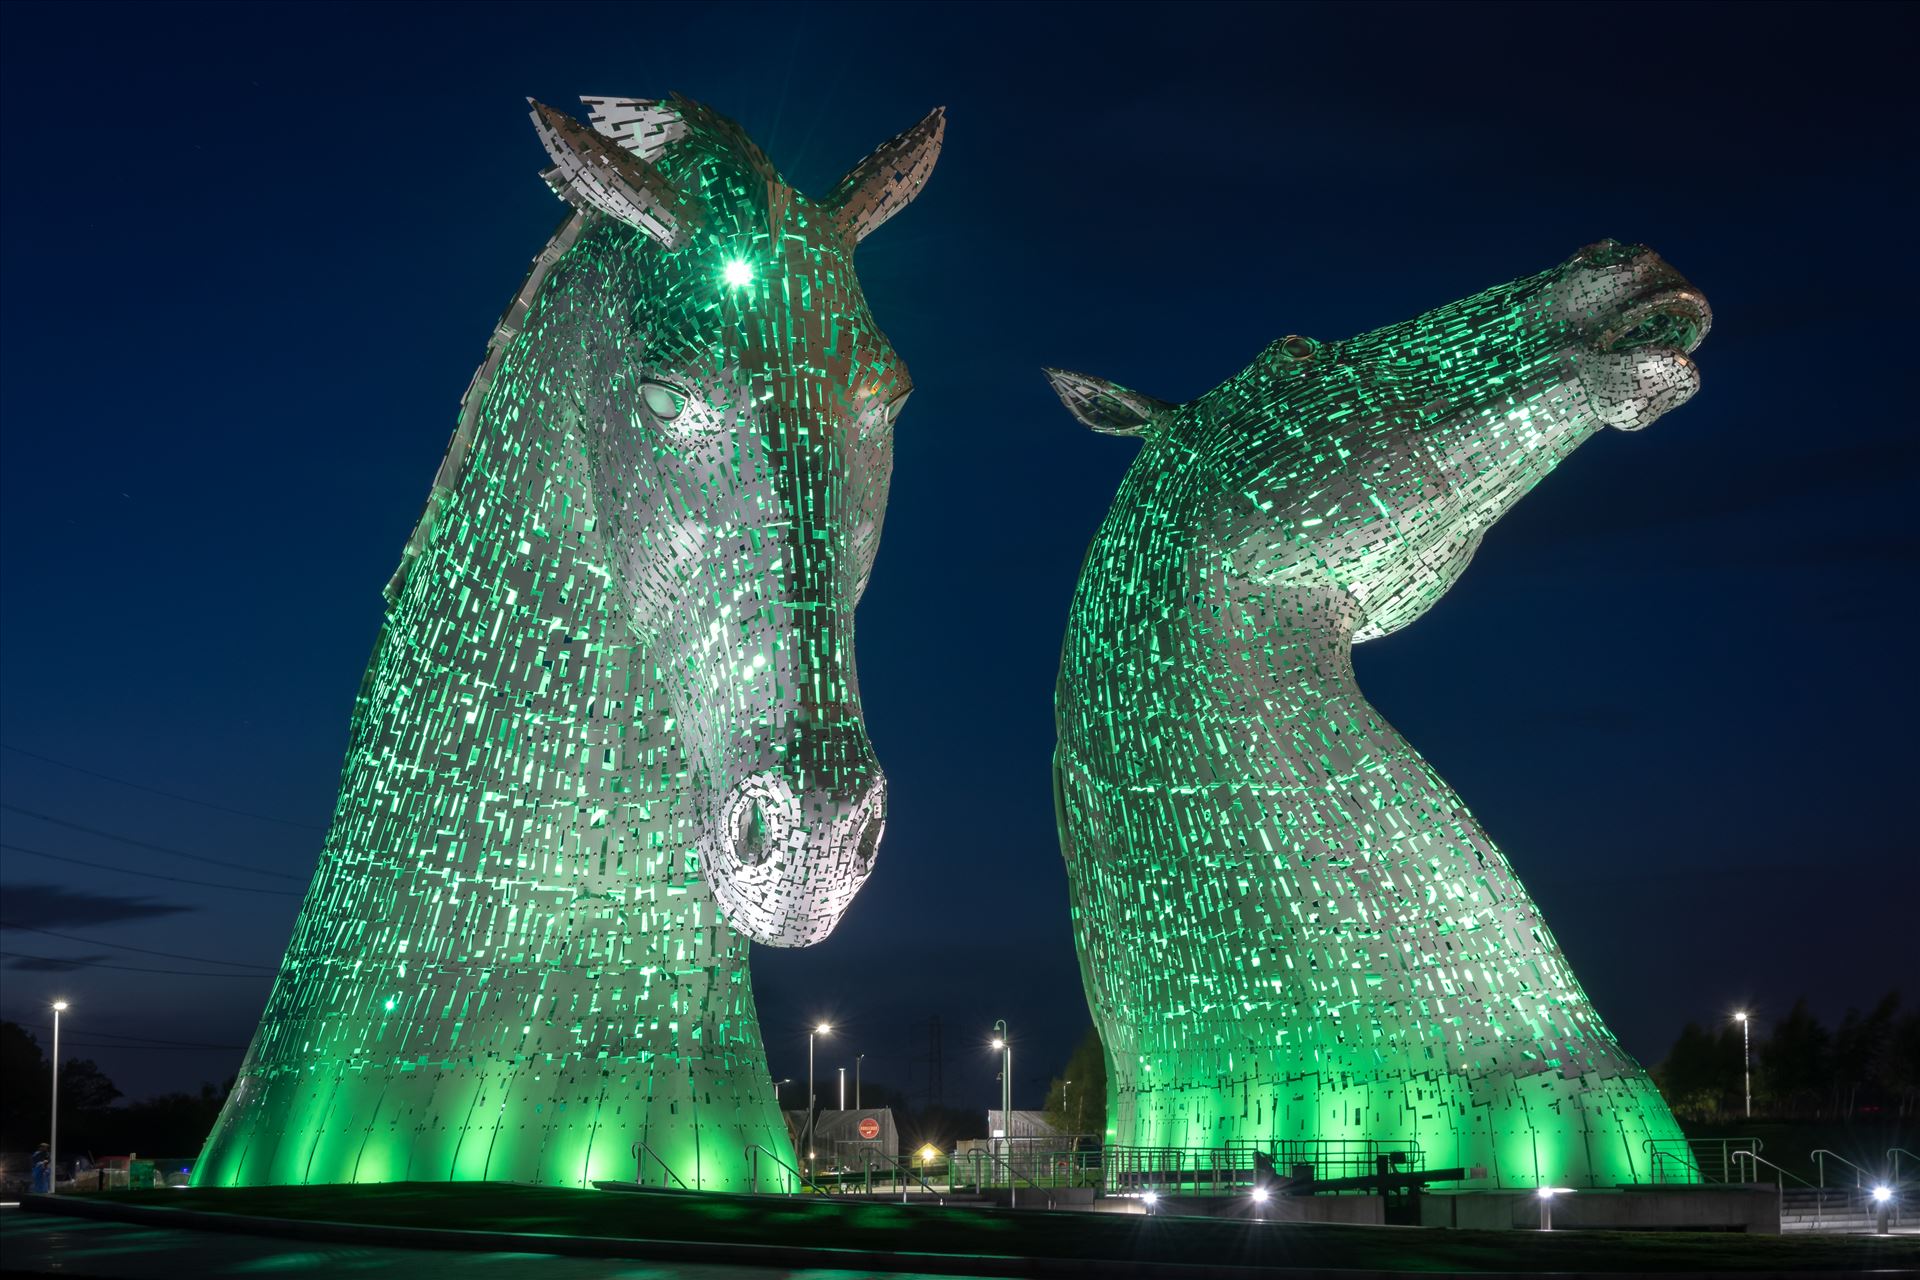 The Kelpies, Falkirk, Scotland - Green - Built of structural steel with a stainless steel cladding, The Kelpies are 30 metres high and weigh 300 tonnes each. Construction began in June 2013 by Graham Dobson Photography